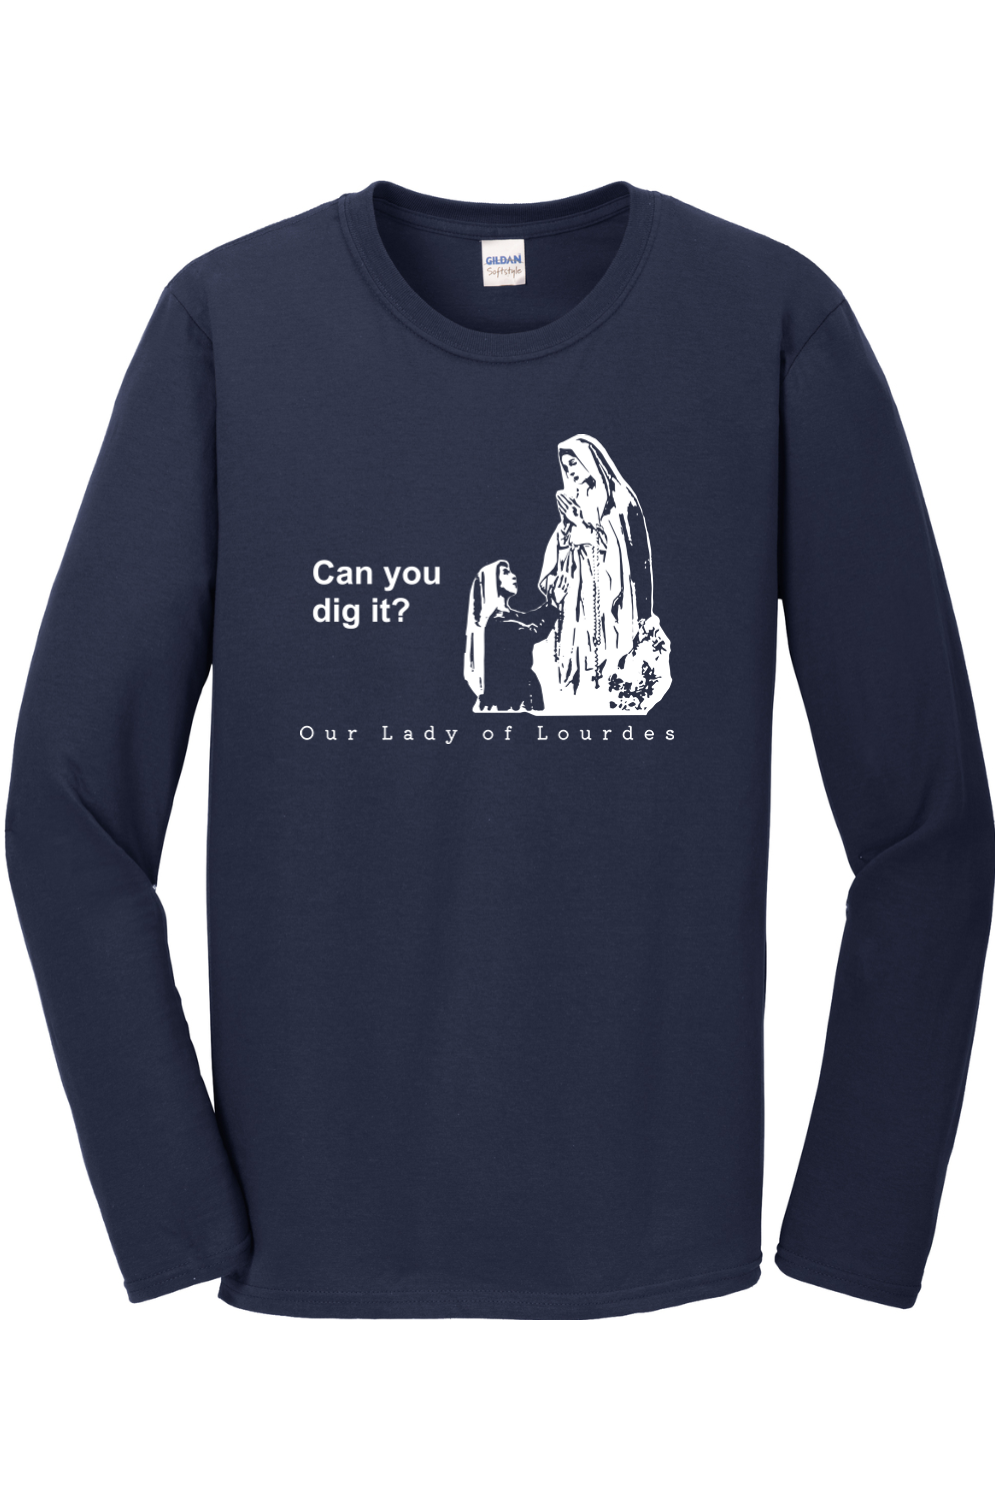 Can you dig it? Our Lady of Lourdes Long Sleeve